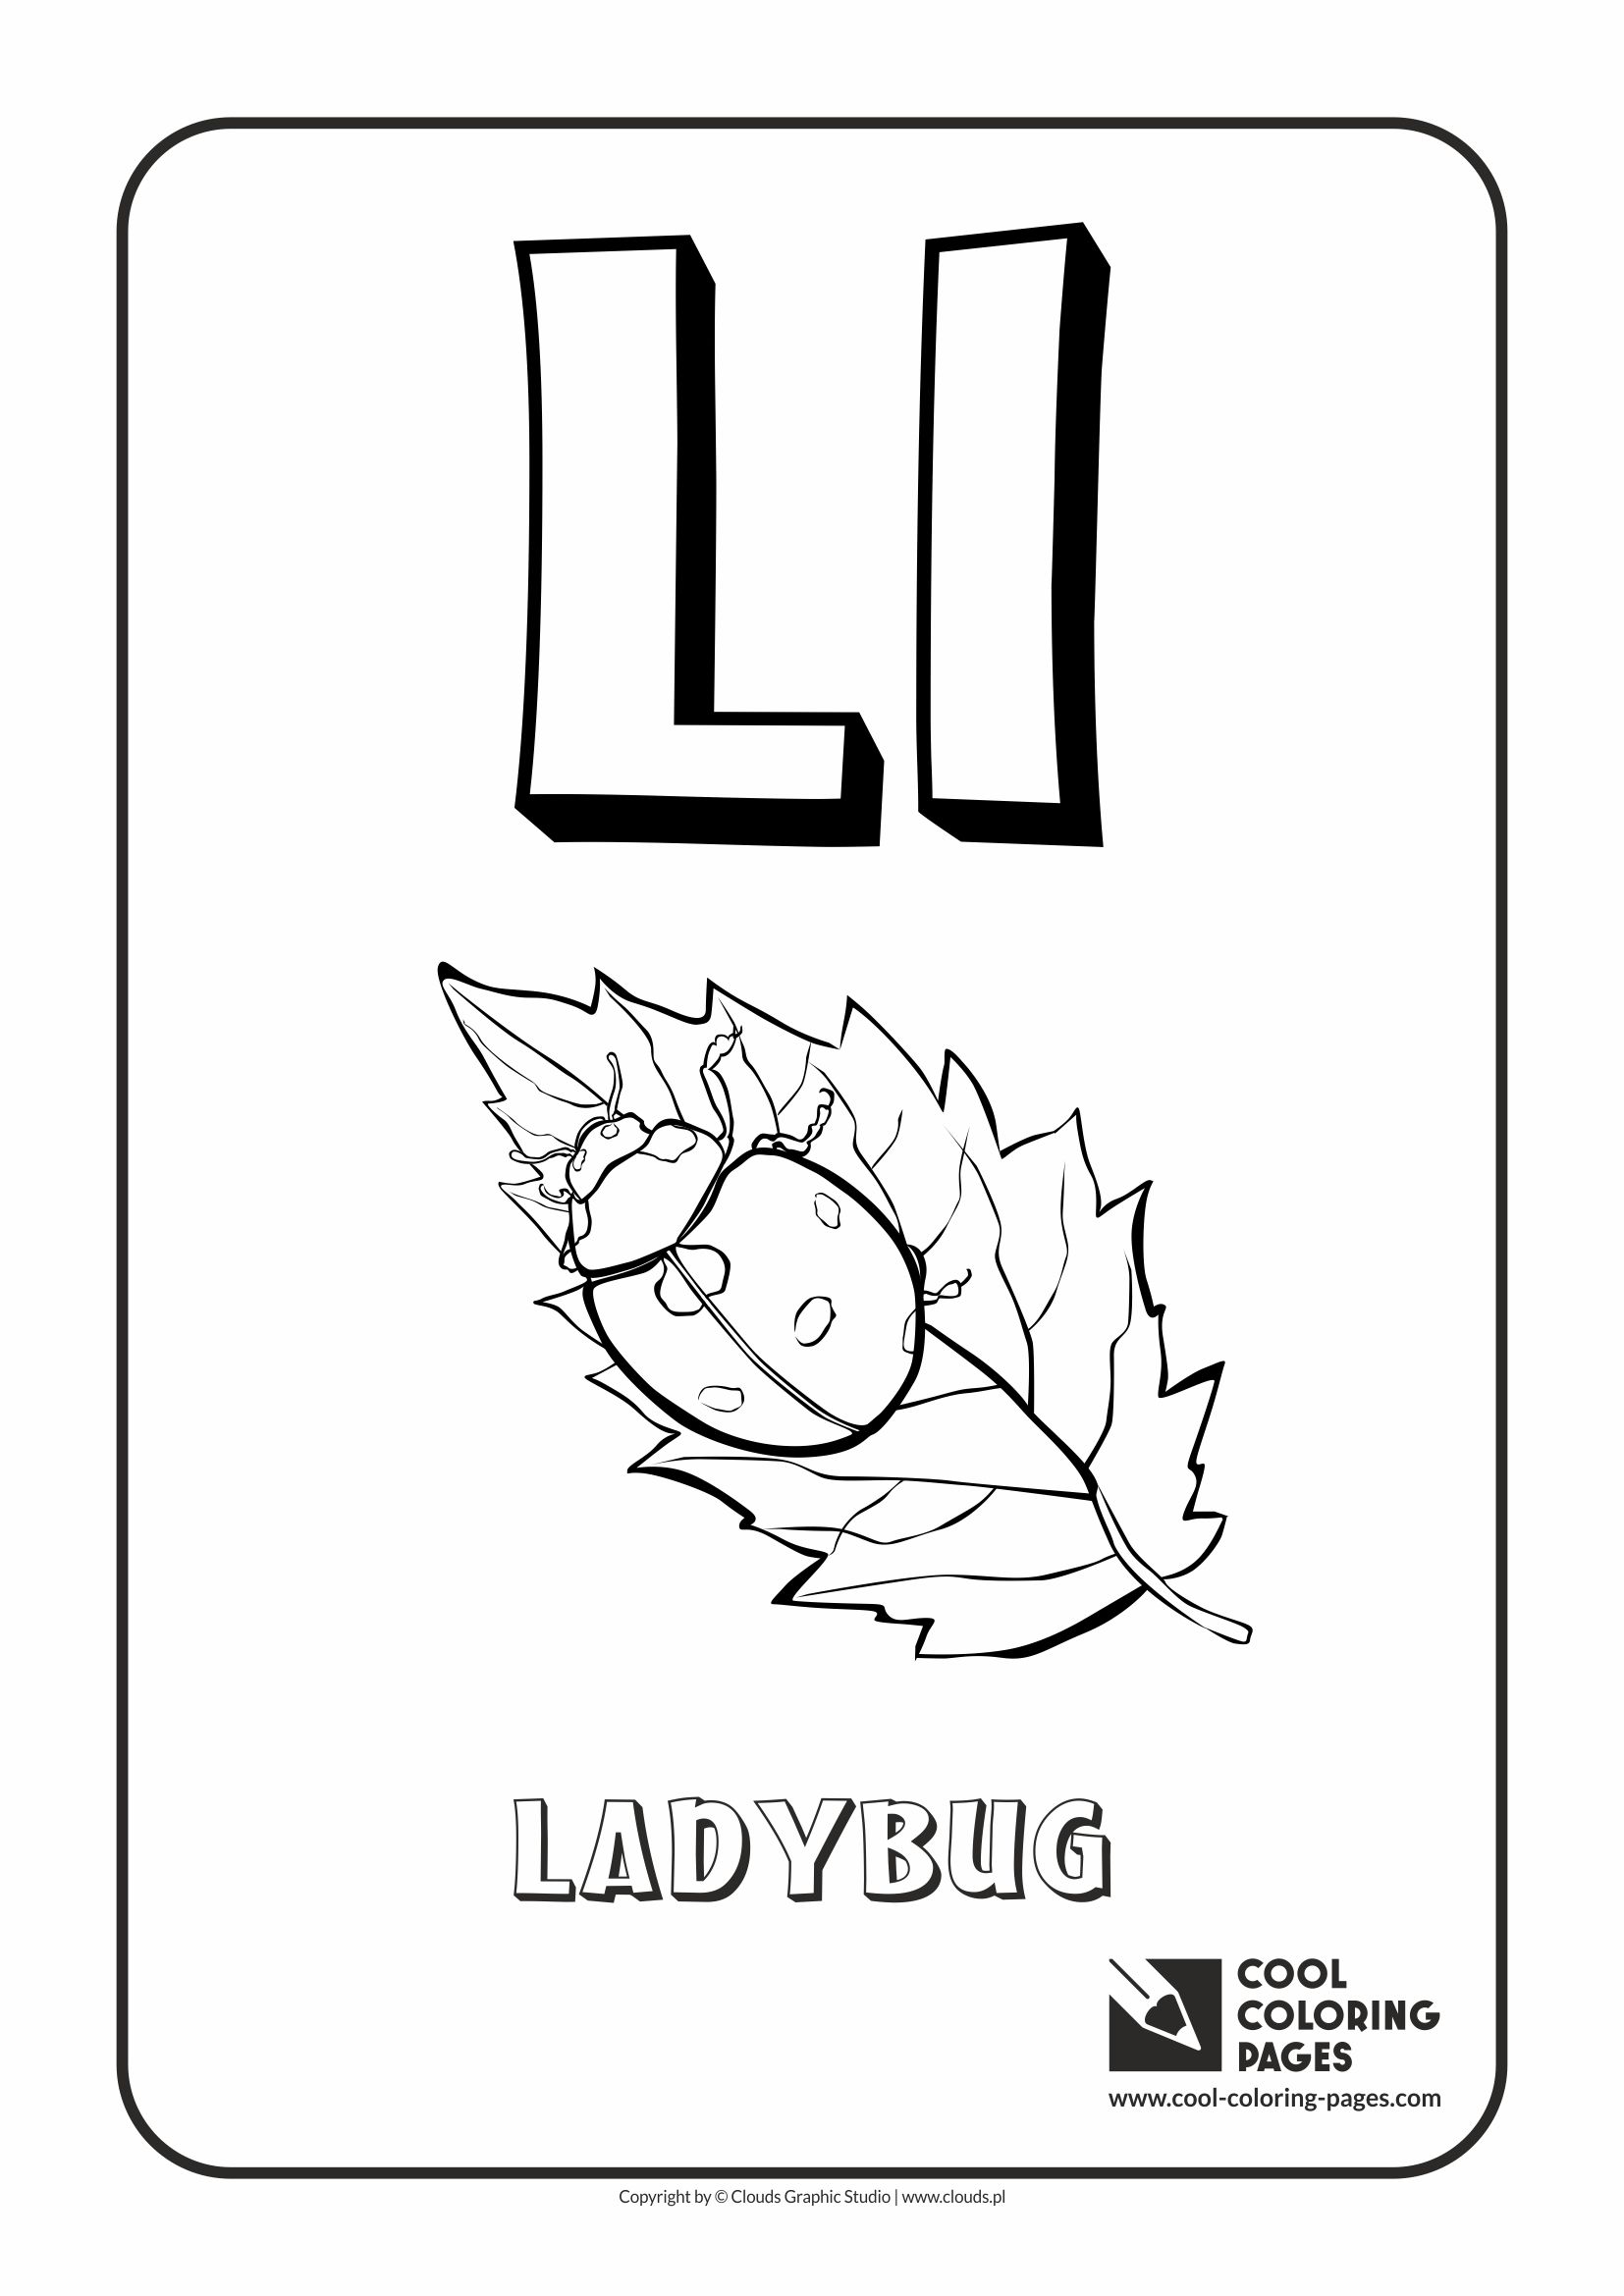 Cool coloring pages letter l